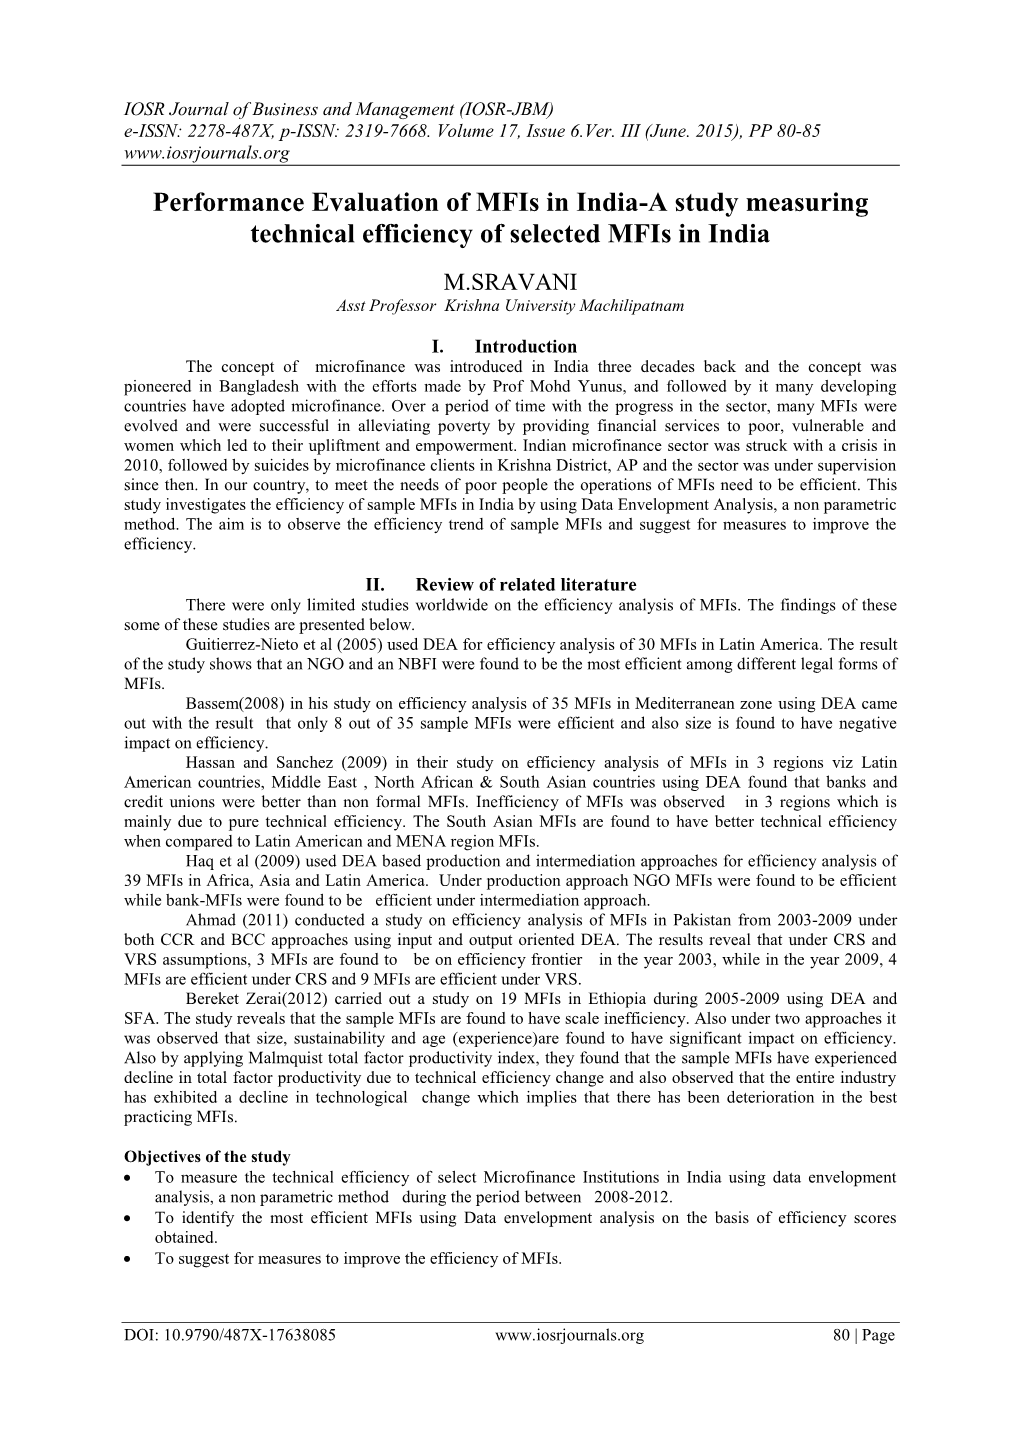 Performance Evaluation of Mfis in India-A Study Measuring Technical Efficiency of Selected Mfis in India